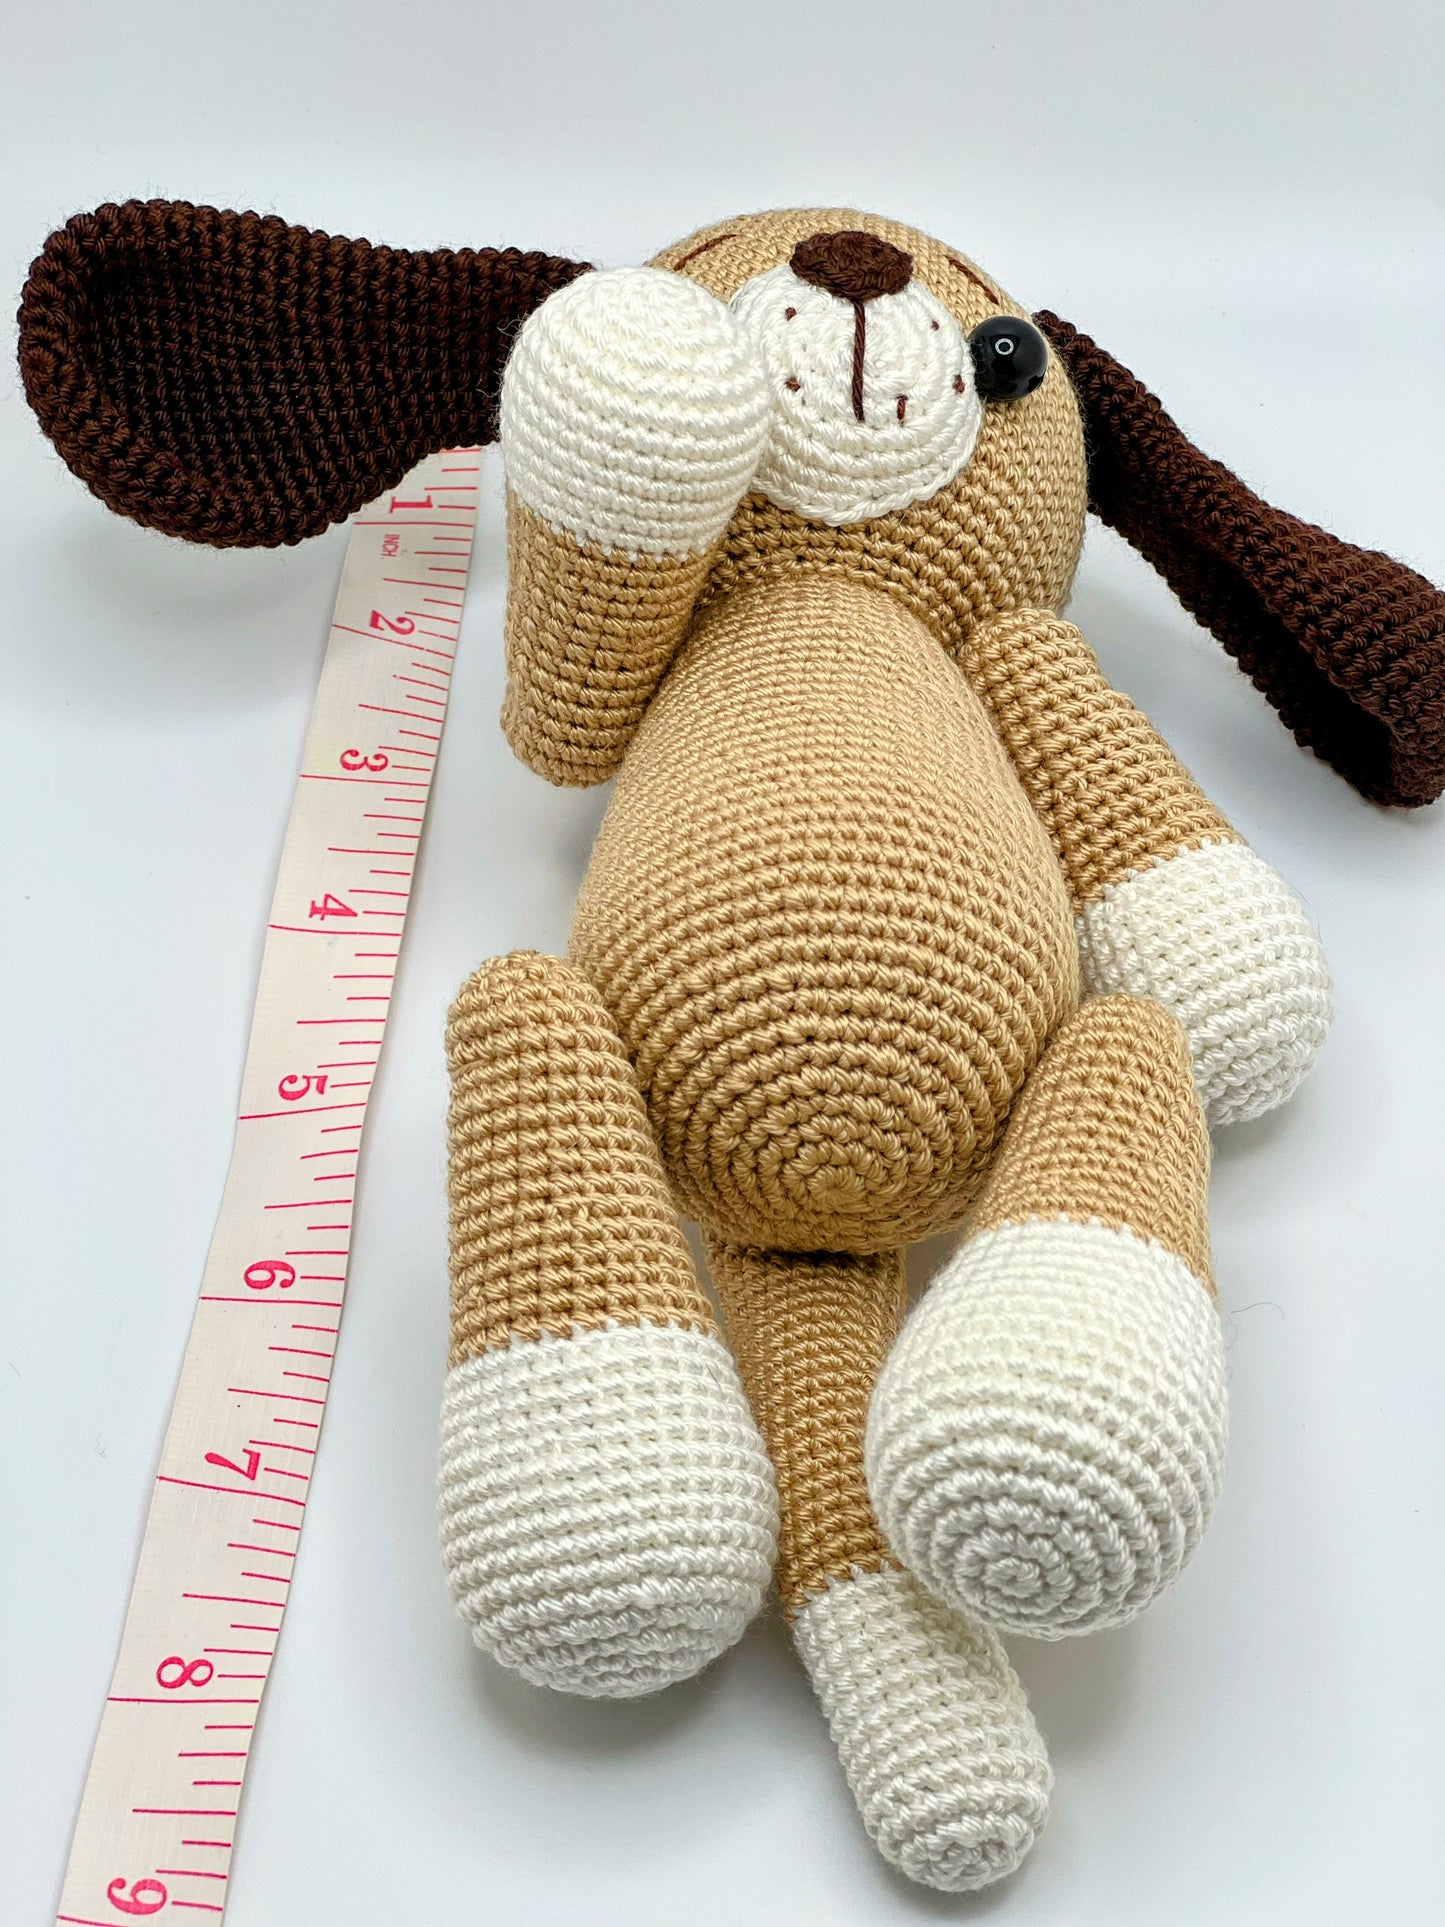 Stuffed Brown Dog Toy With Moving Legs - Crochet Knitted Amigurumi Toy